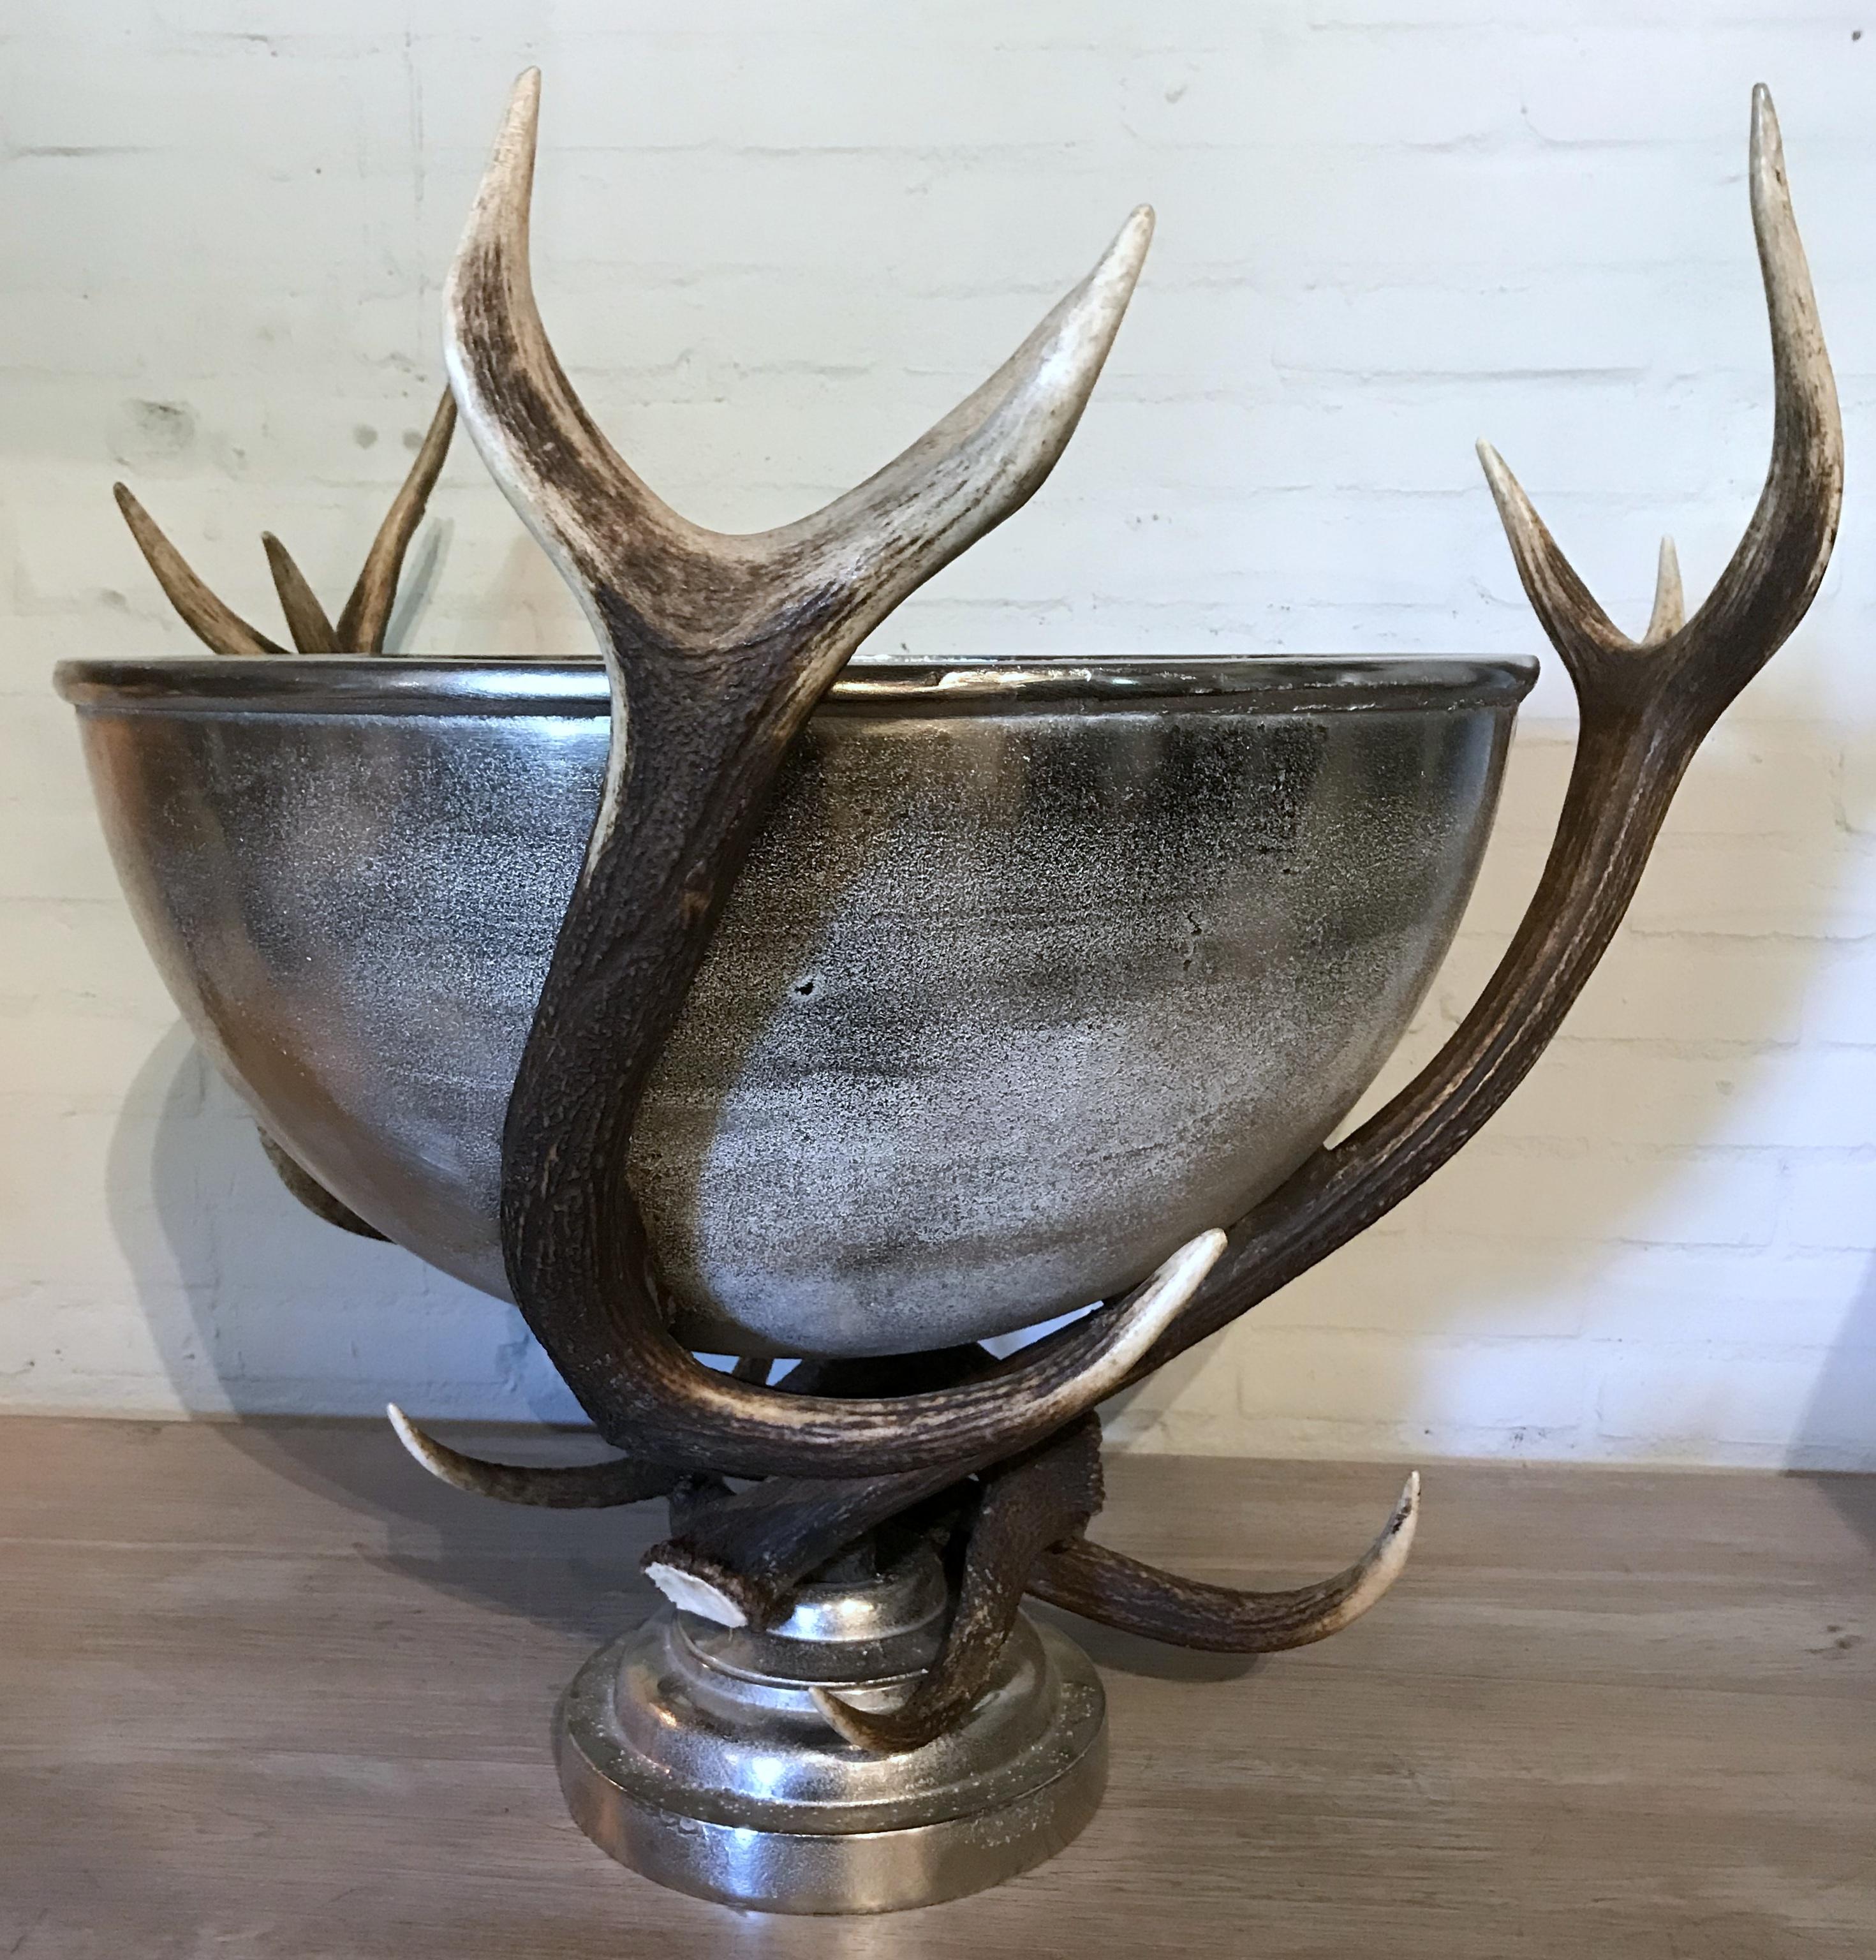 Enormous champagne cooler made of red deer antler. The bowl is made of robust nickel-plated metal.
Very decorative piece to fill up with ice and bottles of wine or champagne. The bowl has a diameter of 59 cm.